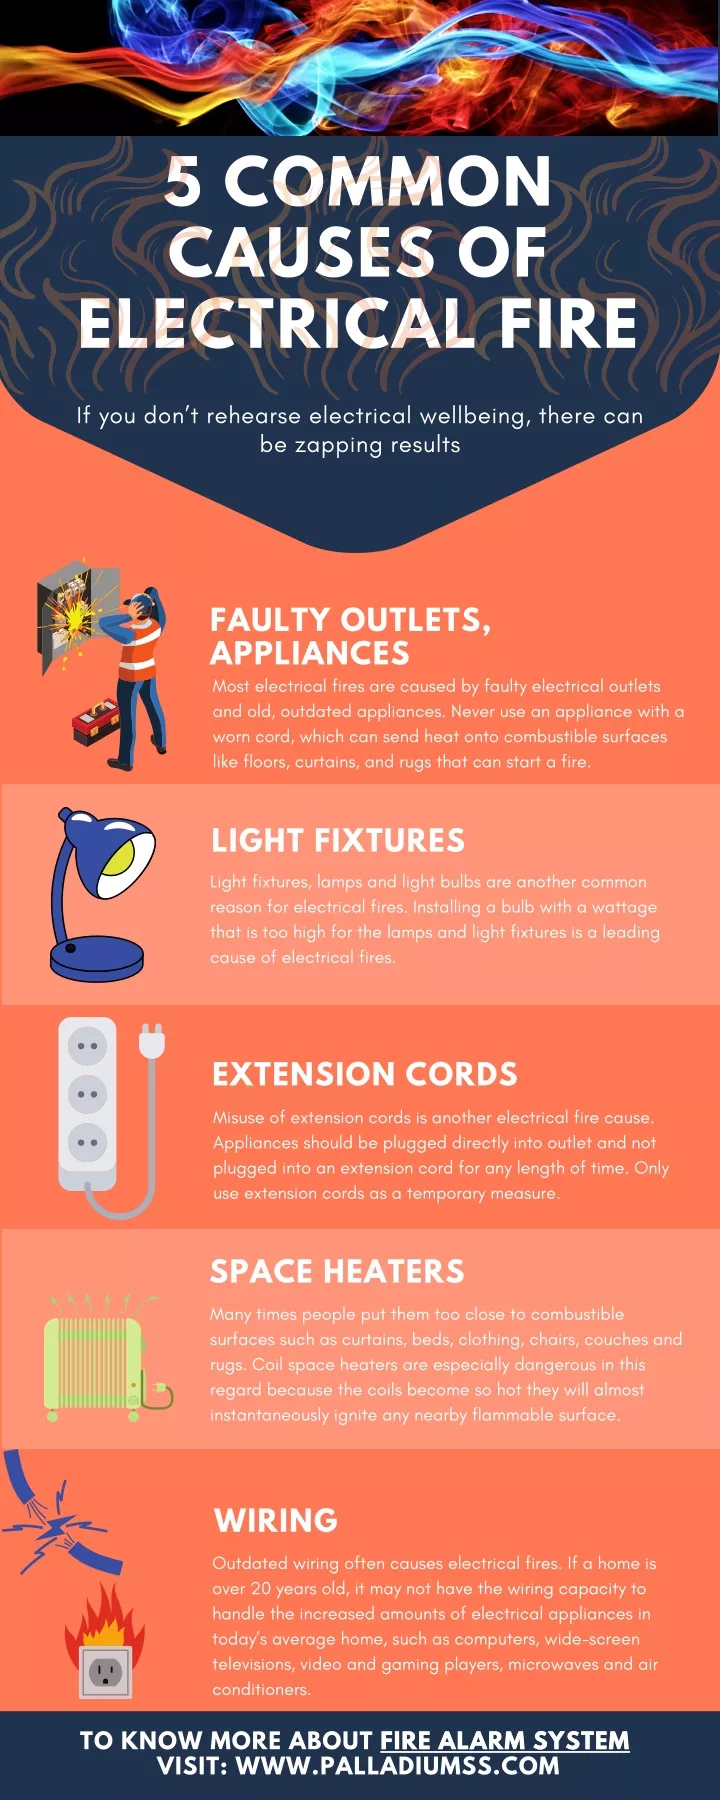 5 common causes of electrical fire